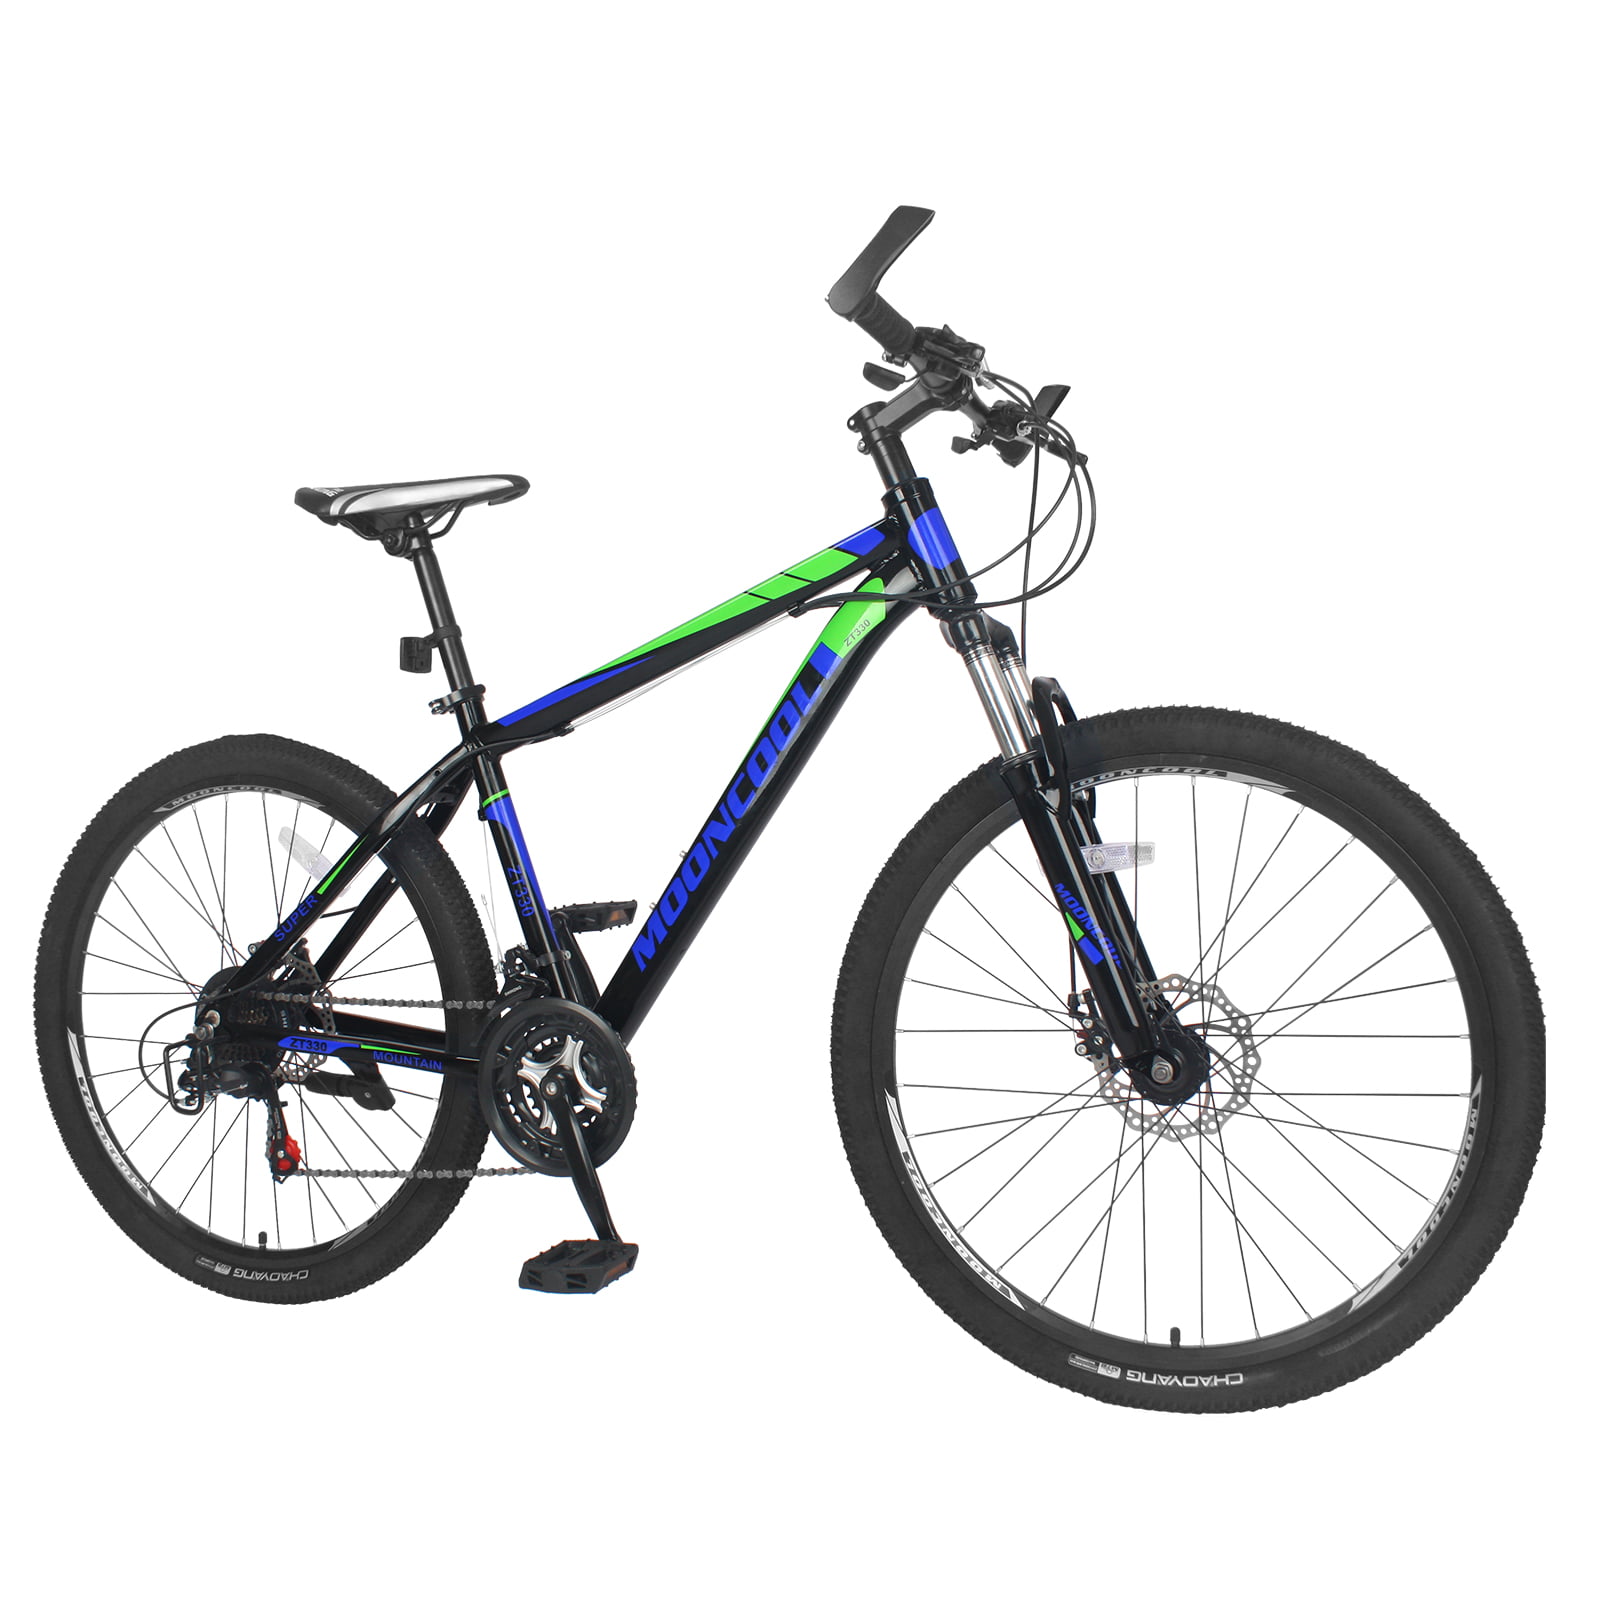 Details about   27.5" Aluminium Mountain Bike Shimano 21 Speed Mens Bicycle front Suspension L 